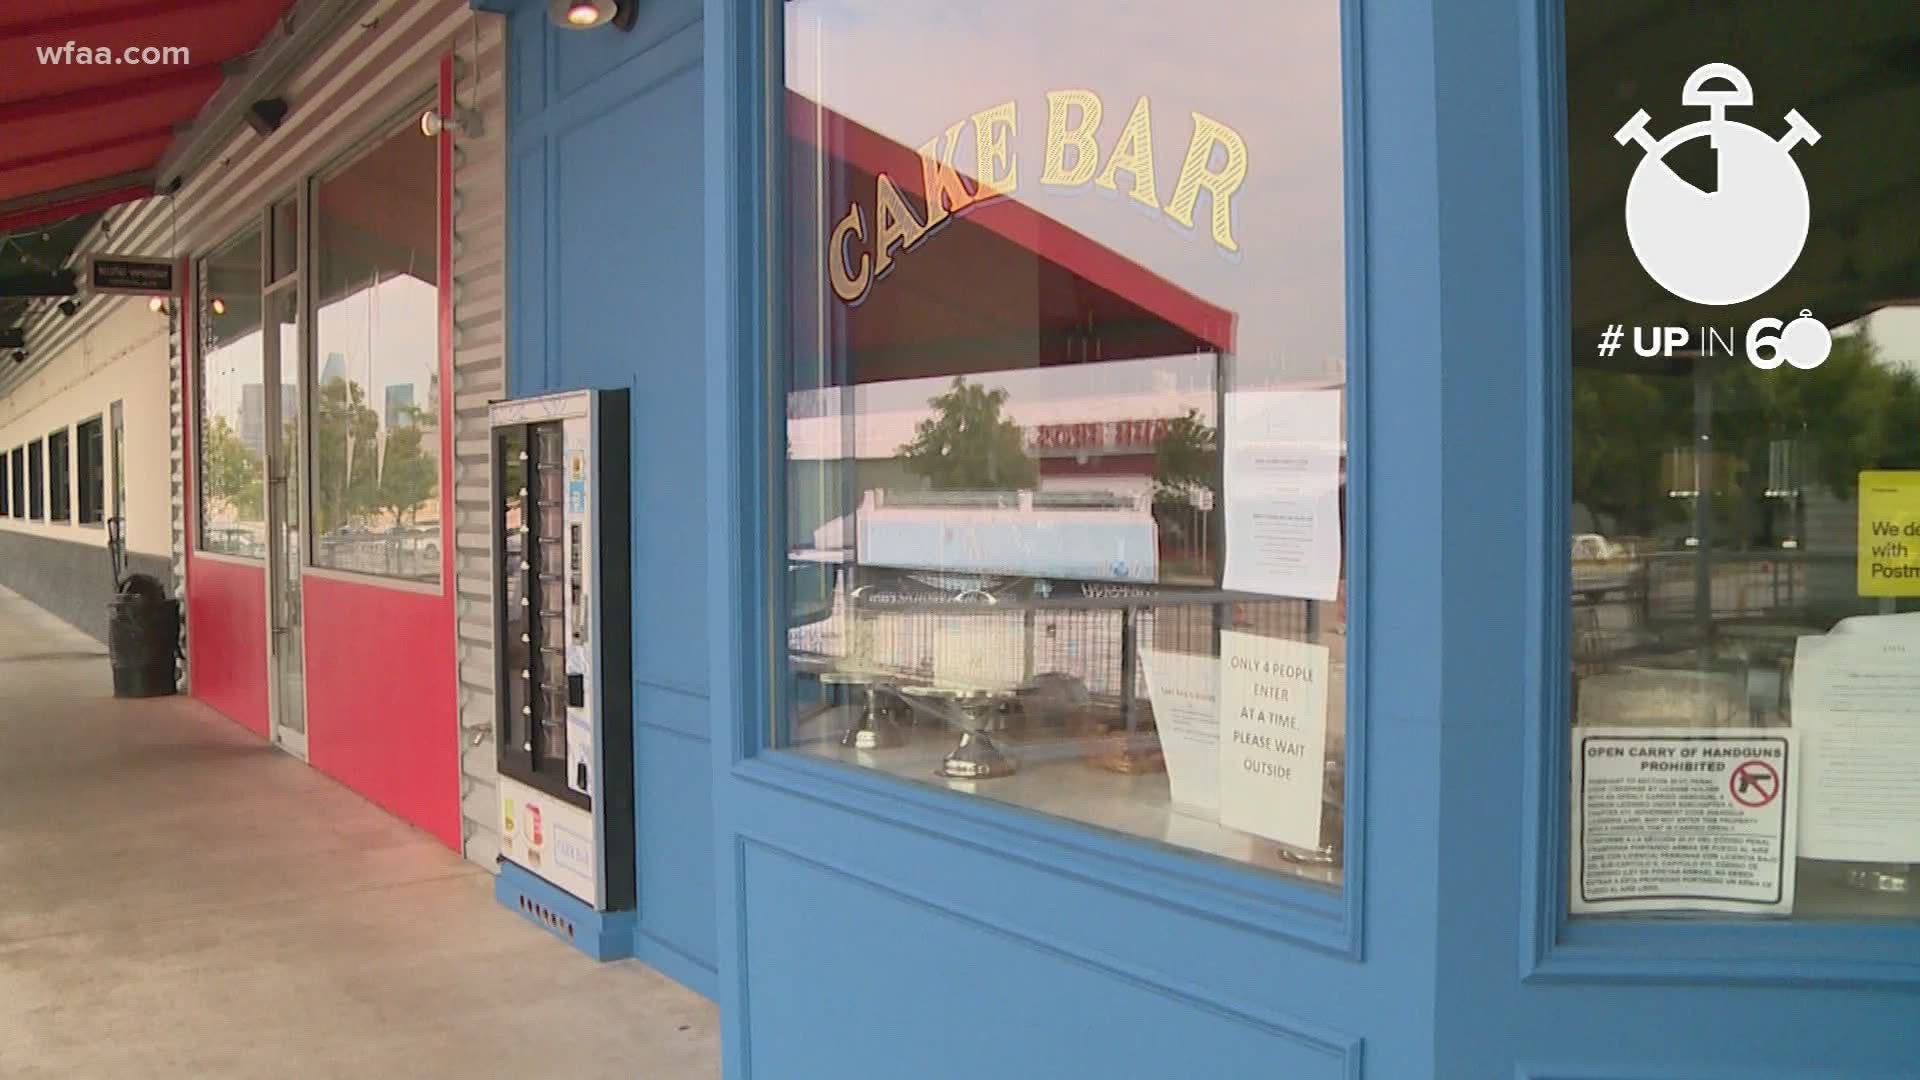 COVID-19 has caused problems for a lot of small businesses all over the country. One business owner in Dallas found a unique way to serve her product.